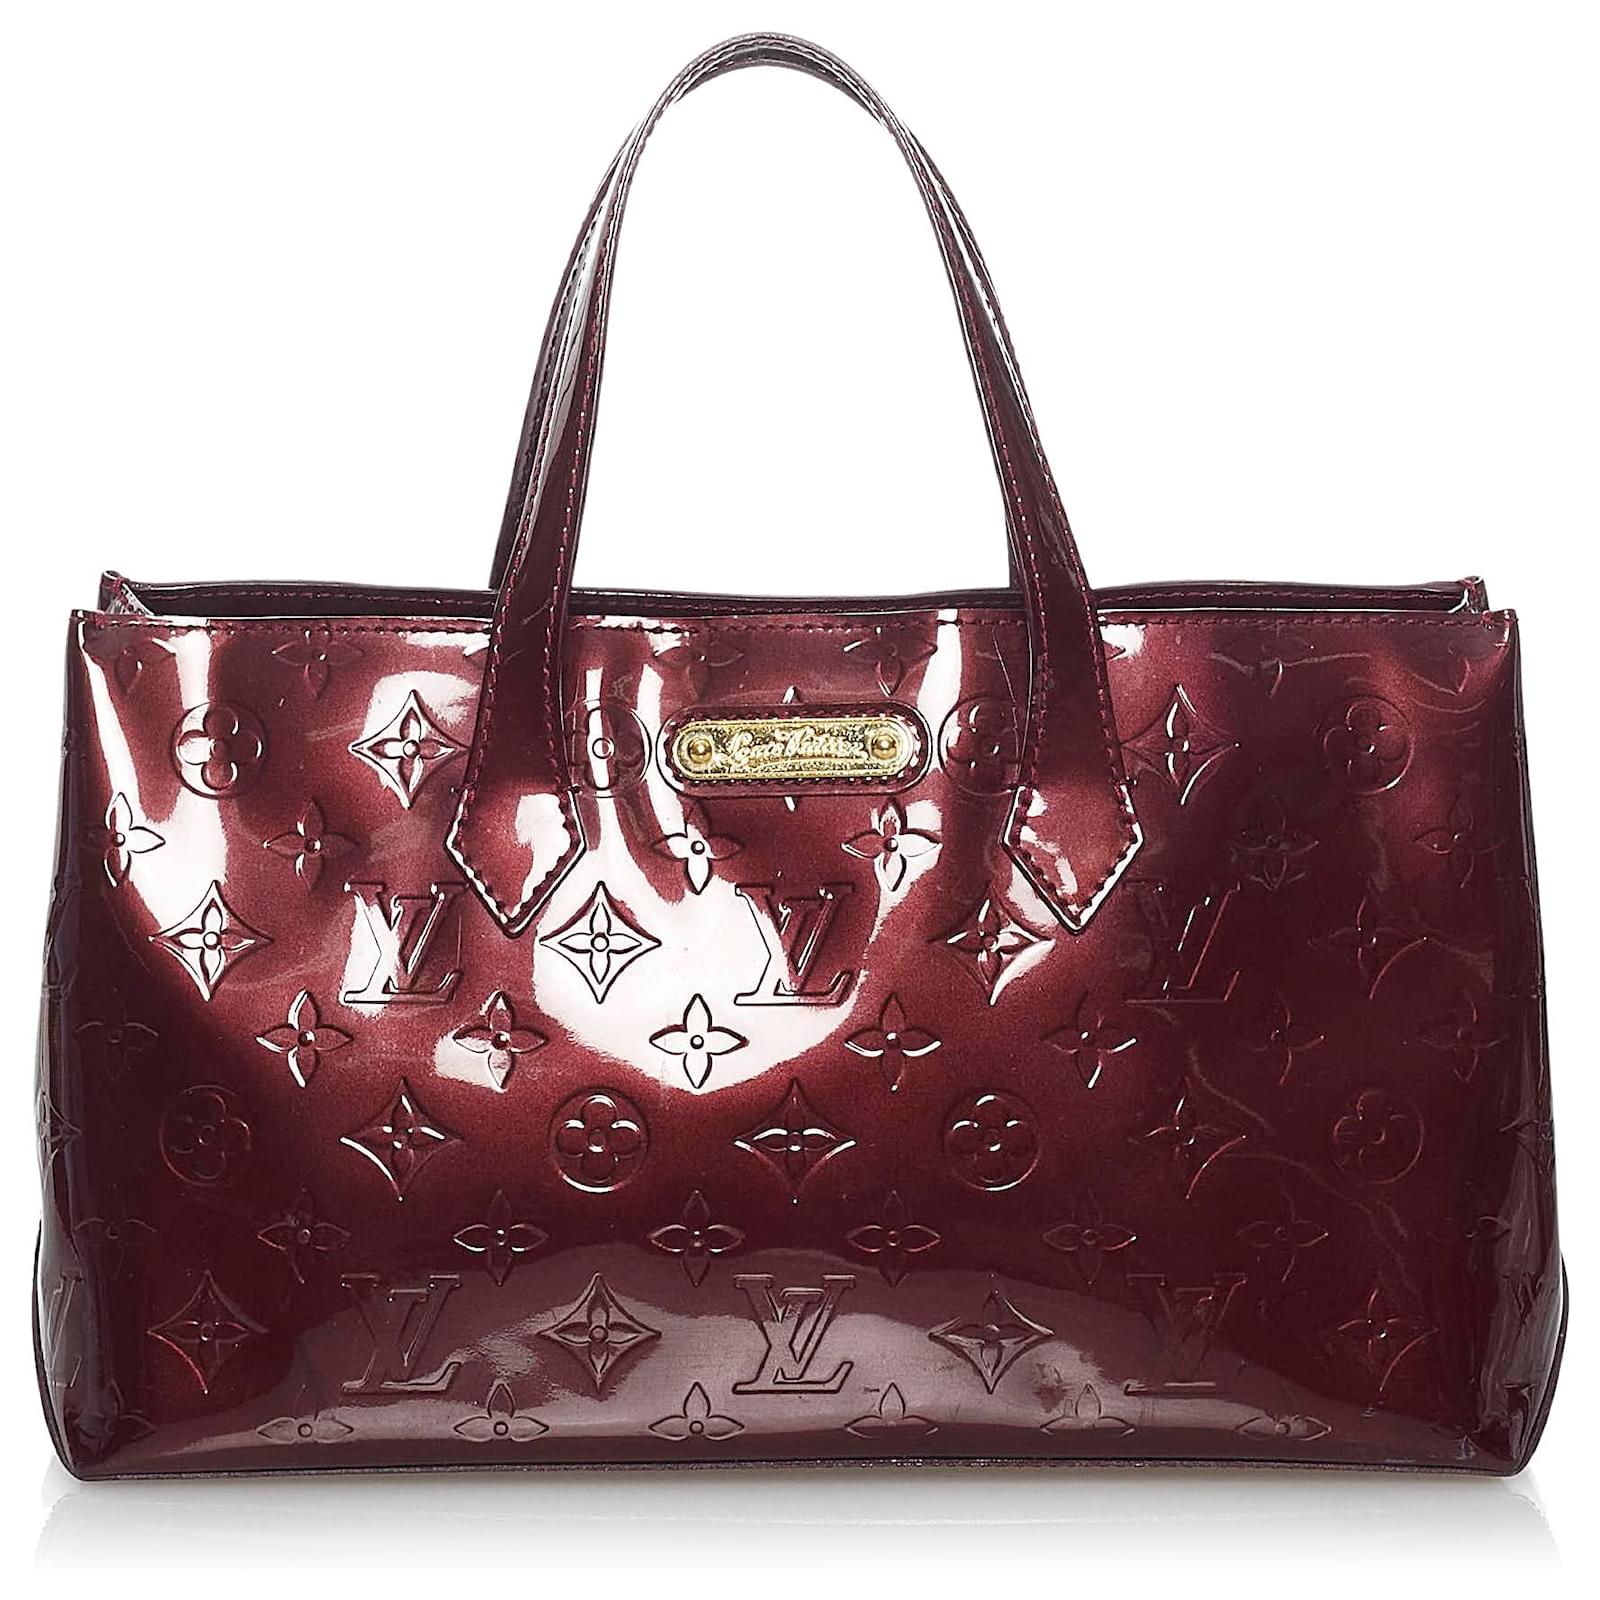 Review on my Louis Vuitton Wilshire PM in Vernis Leather 